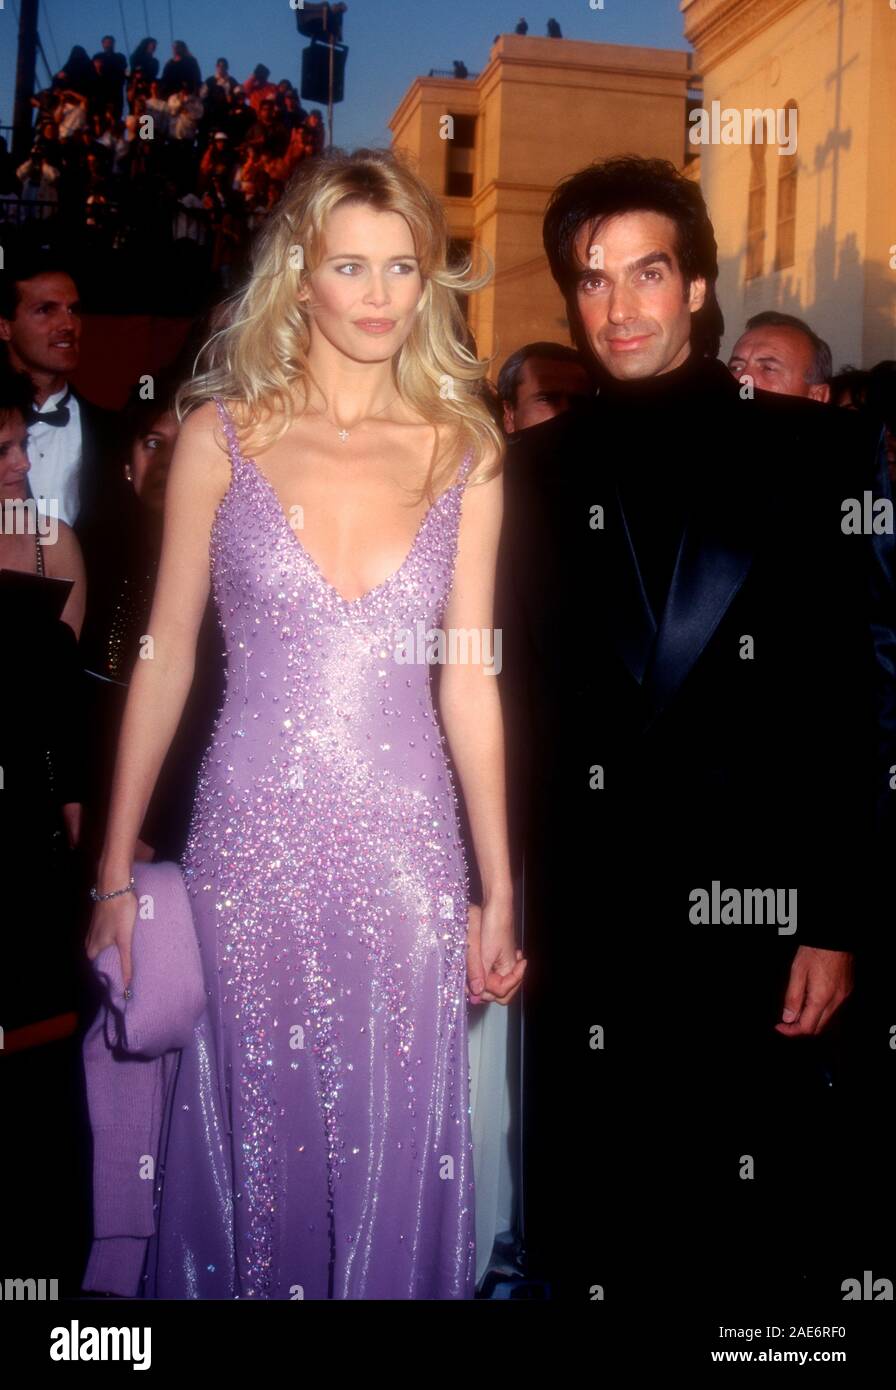 Los Angeles, California, USA 27th March 1995 Model Claudia Schiffer and magician David Copperfield attend the 67th Annual Academy Awards on March 27, 1995 at the Shrine Auditorium in Los Angeles, California, USA. Photo by Barry King/Alamy Stock Photo Stock Photo